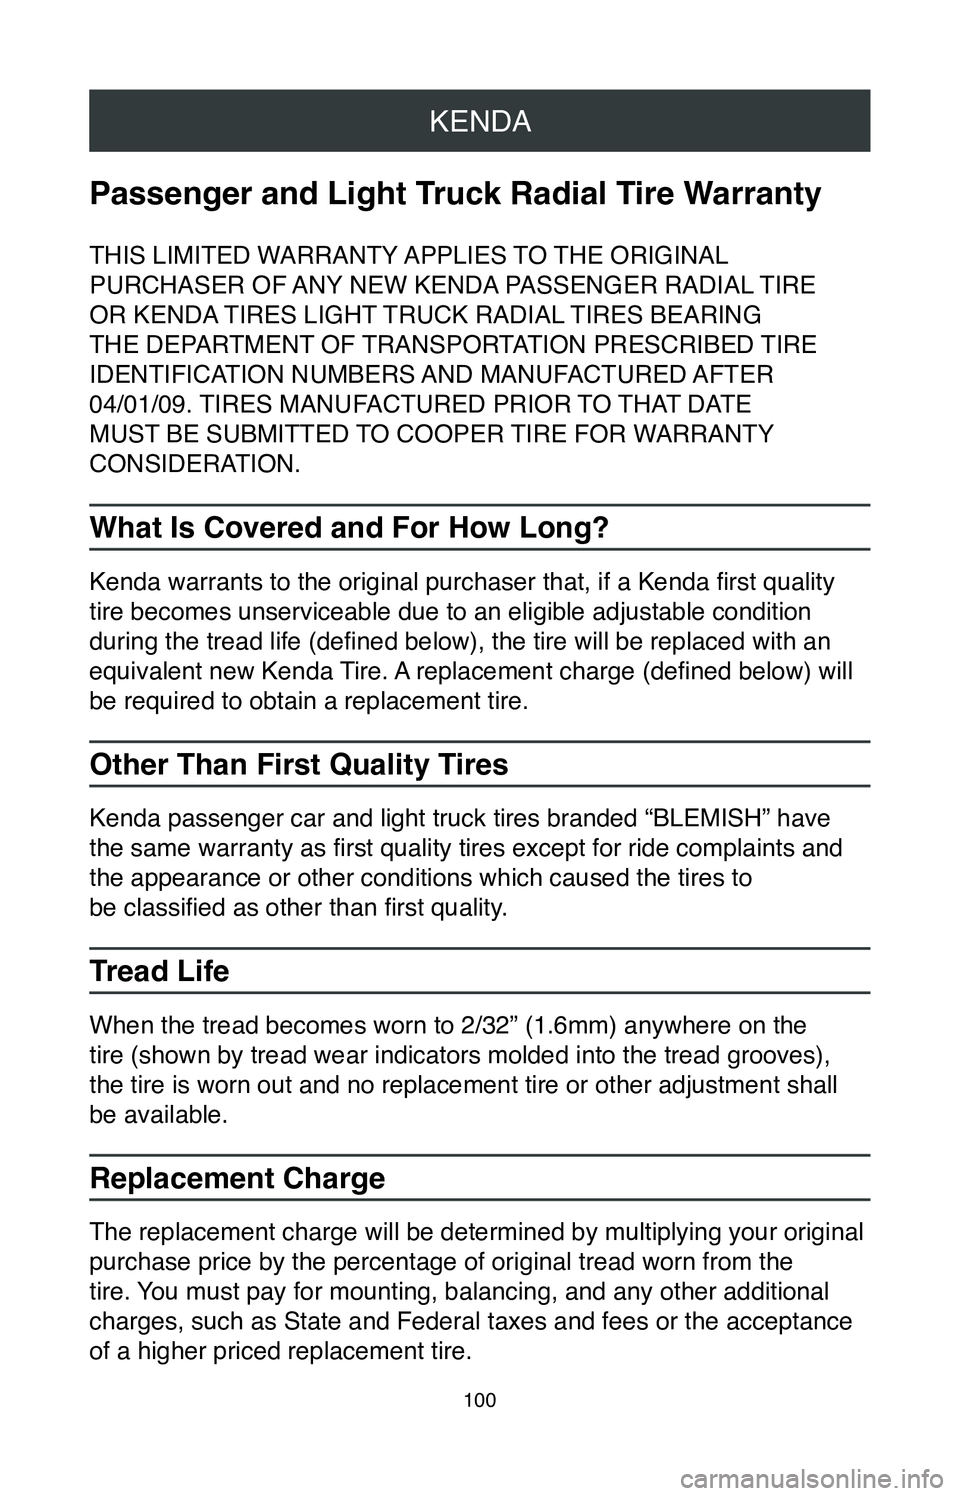 TOYOTA MIRAI 2020  Warranties & Maintenance Guides (in English) KENDA
100
Passenger and Light Truck Radial Tire Warranty
THIS LIMITED WARRANTY APPLIES TO THE ORIGINAL 
PURCHASER OF ANY NEW KENDA PASSENGER RADIAL TIRE 
OR KENDA TIRES LIGHT TRUCK RADIAL TIRES BEARIN